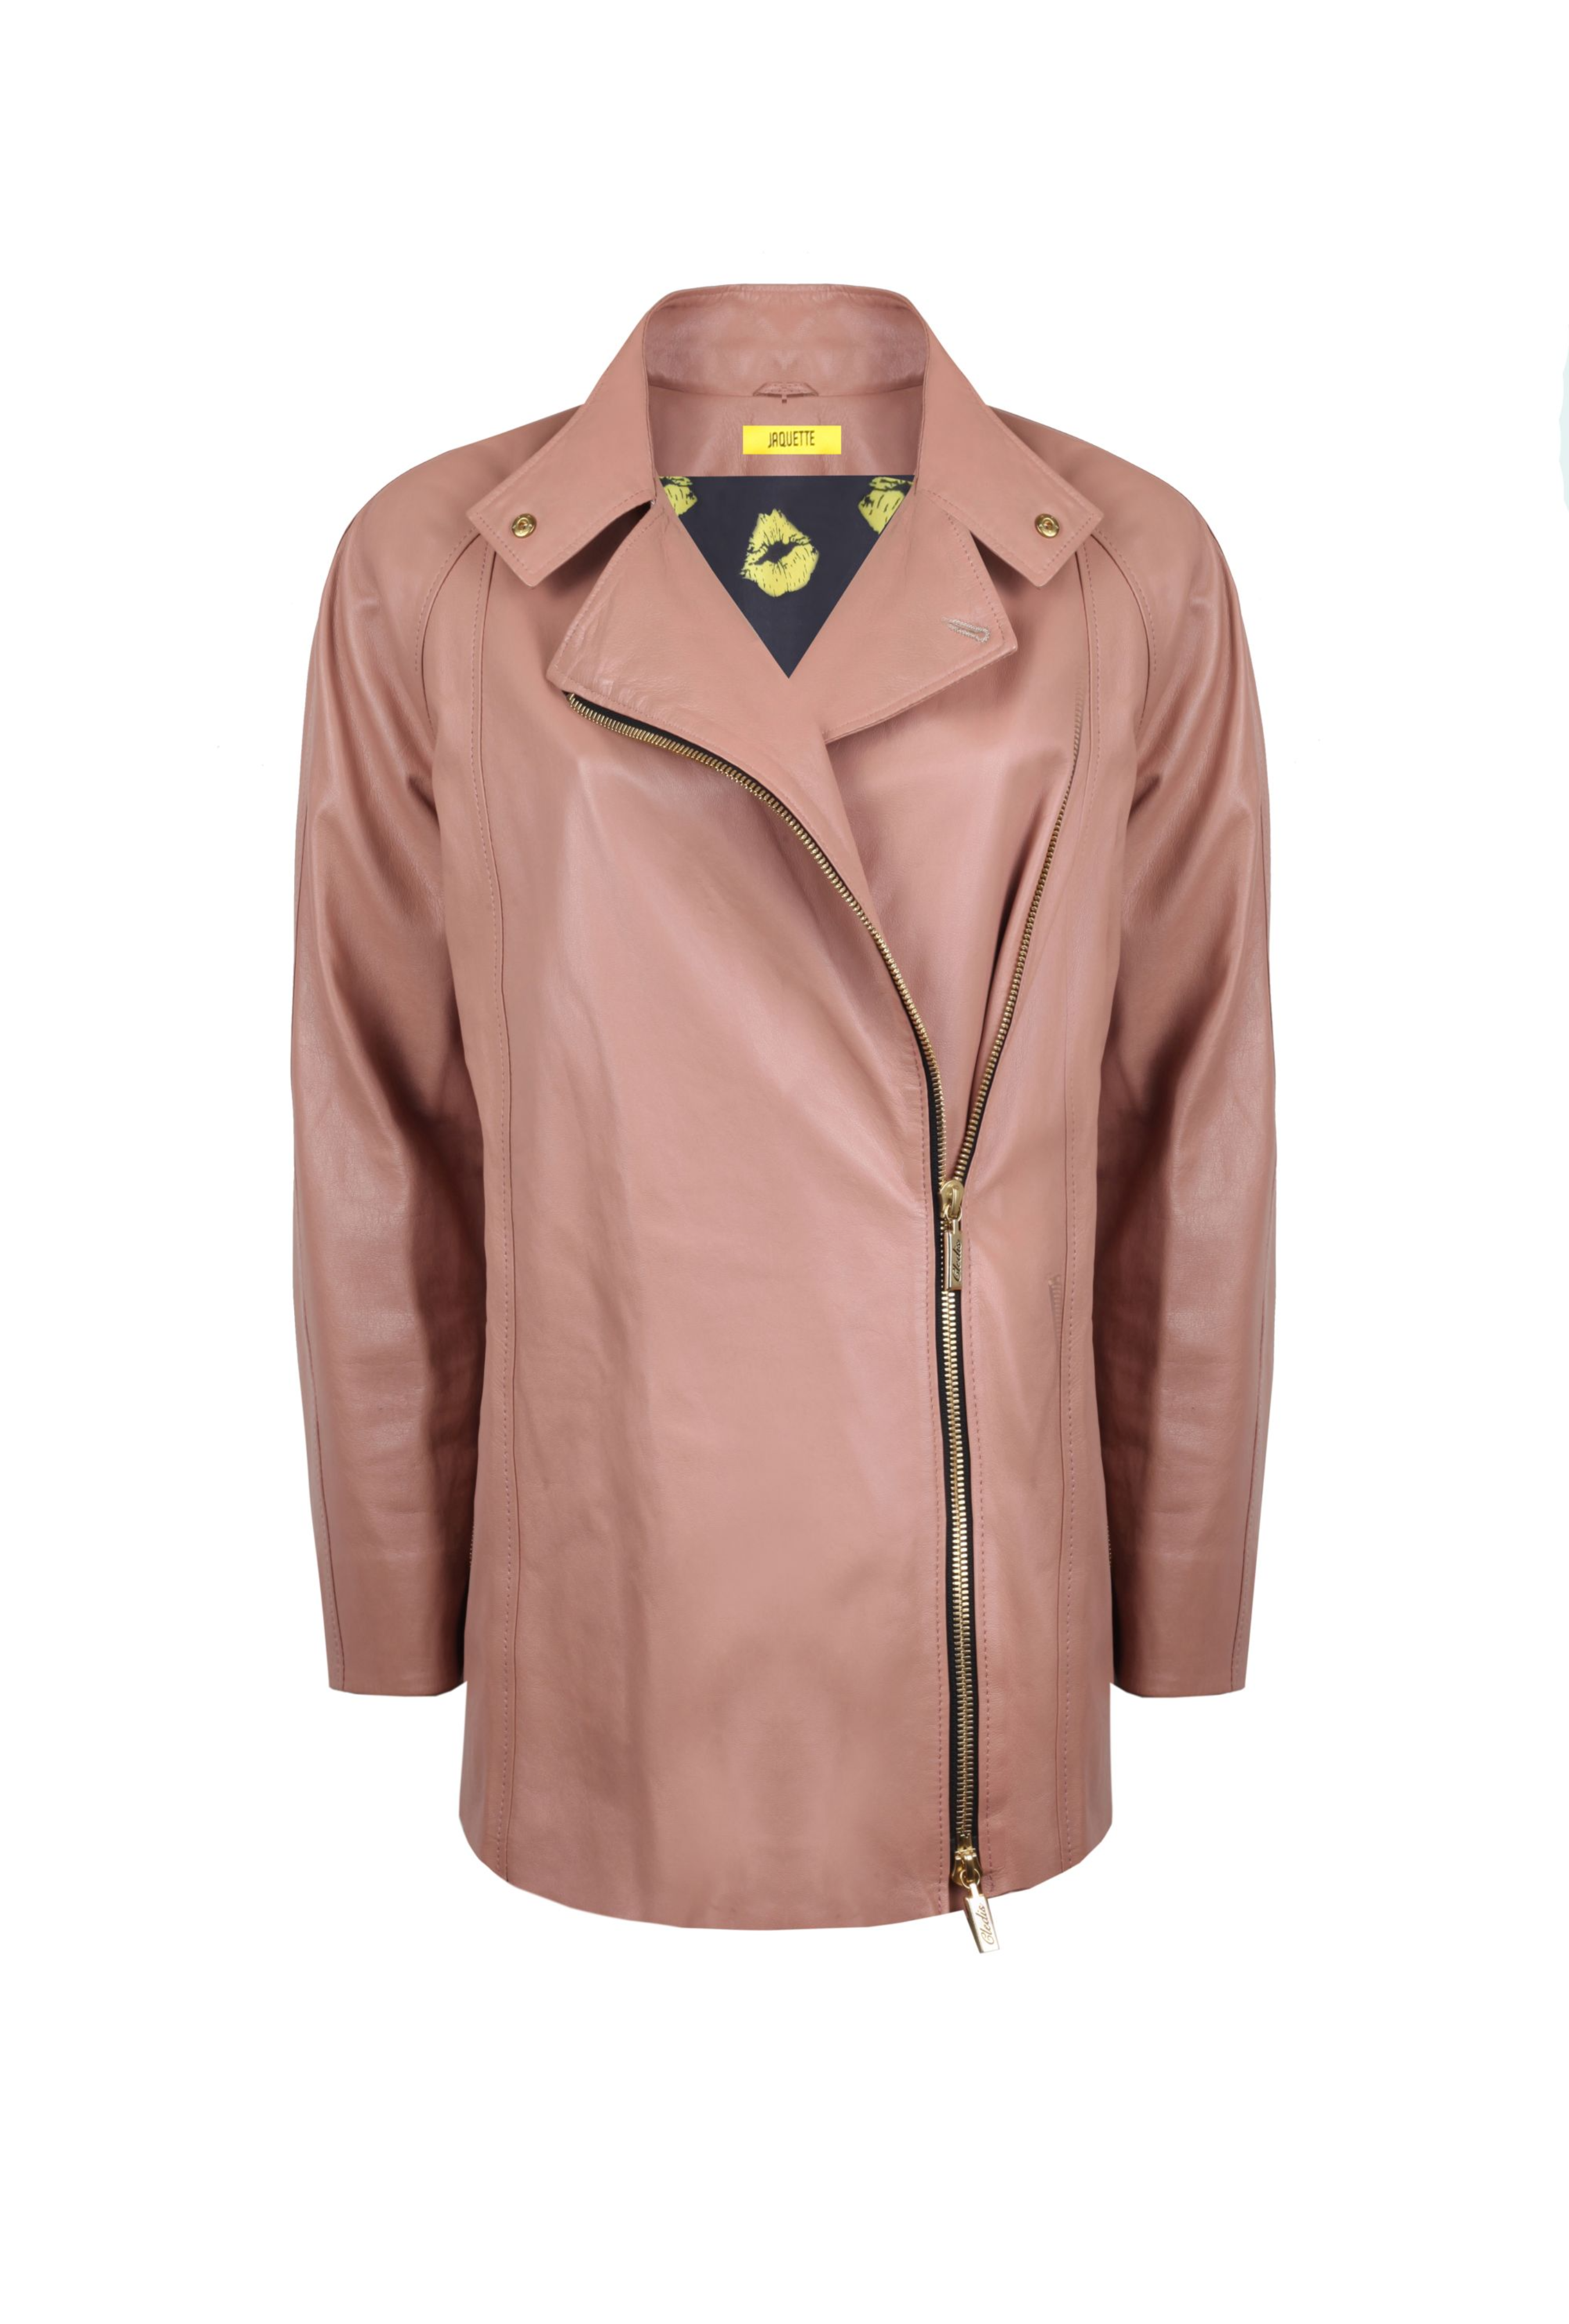 POWDER COLORED LEATHER JACKET